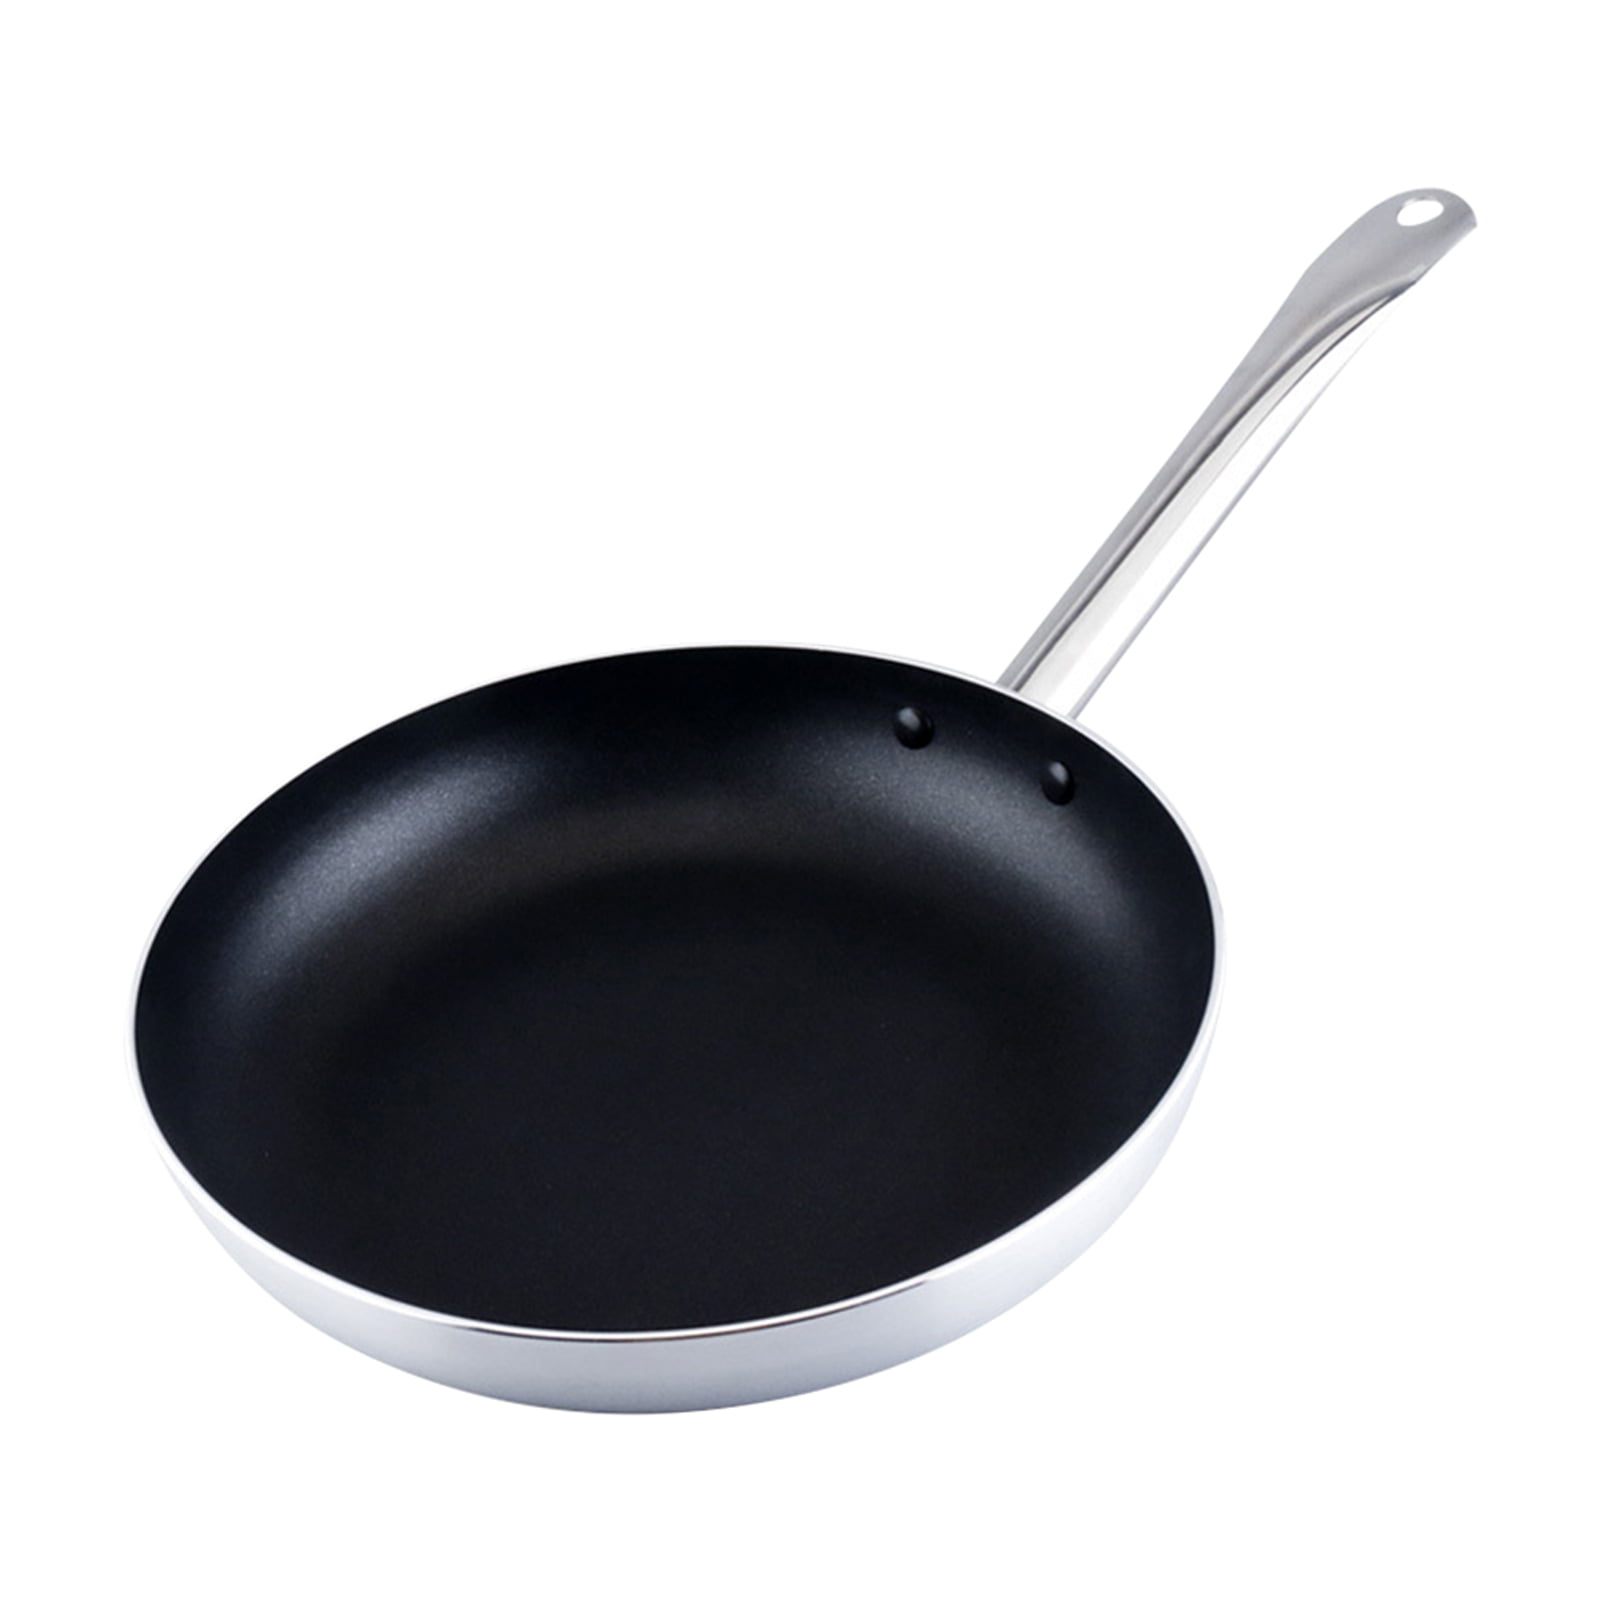 Nonstick Fry Pan Aluminum Frying Pans With Insulated Handle Black Cooking Pan 